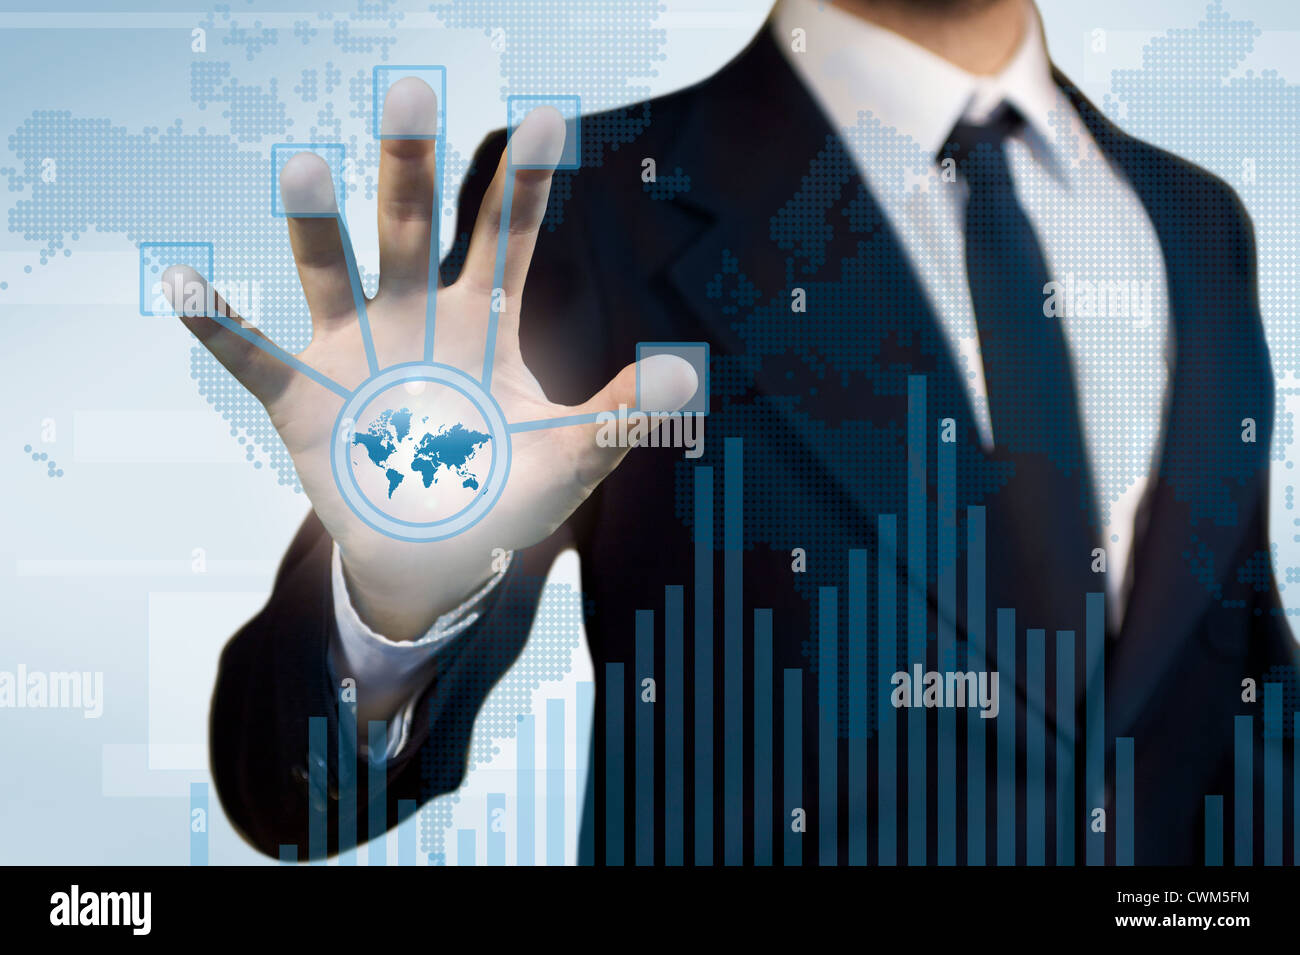 Digital technology for the business application, a business man using a touchscreen for finace purpose, diagram and histogram Stock Photo